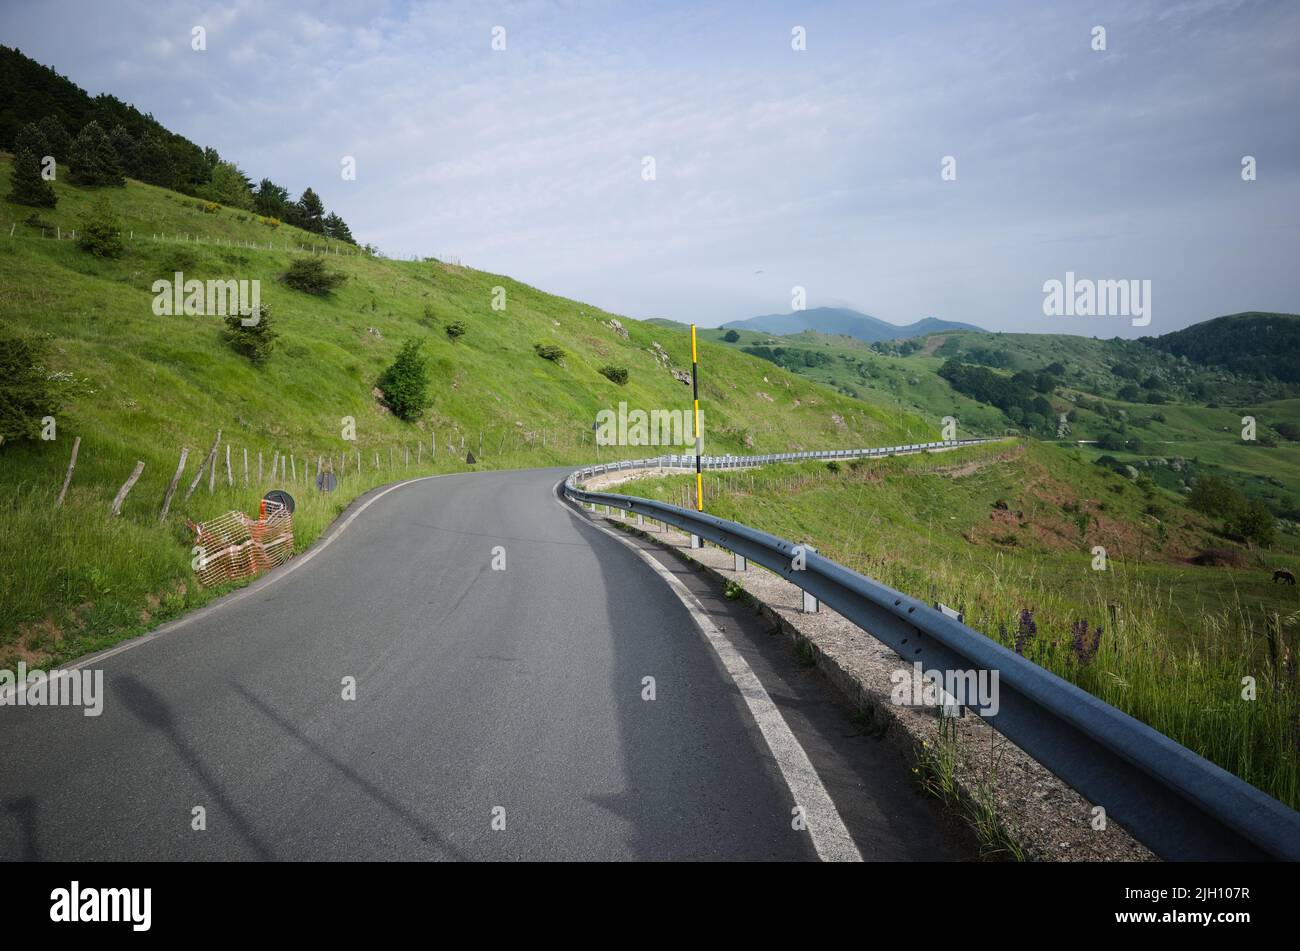 Winding asphalt road with traffic barrier an without median strip in Apennines, Liguria, Italy. Mountain road among green hills. Scenic landscape Stock Photo